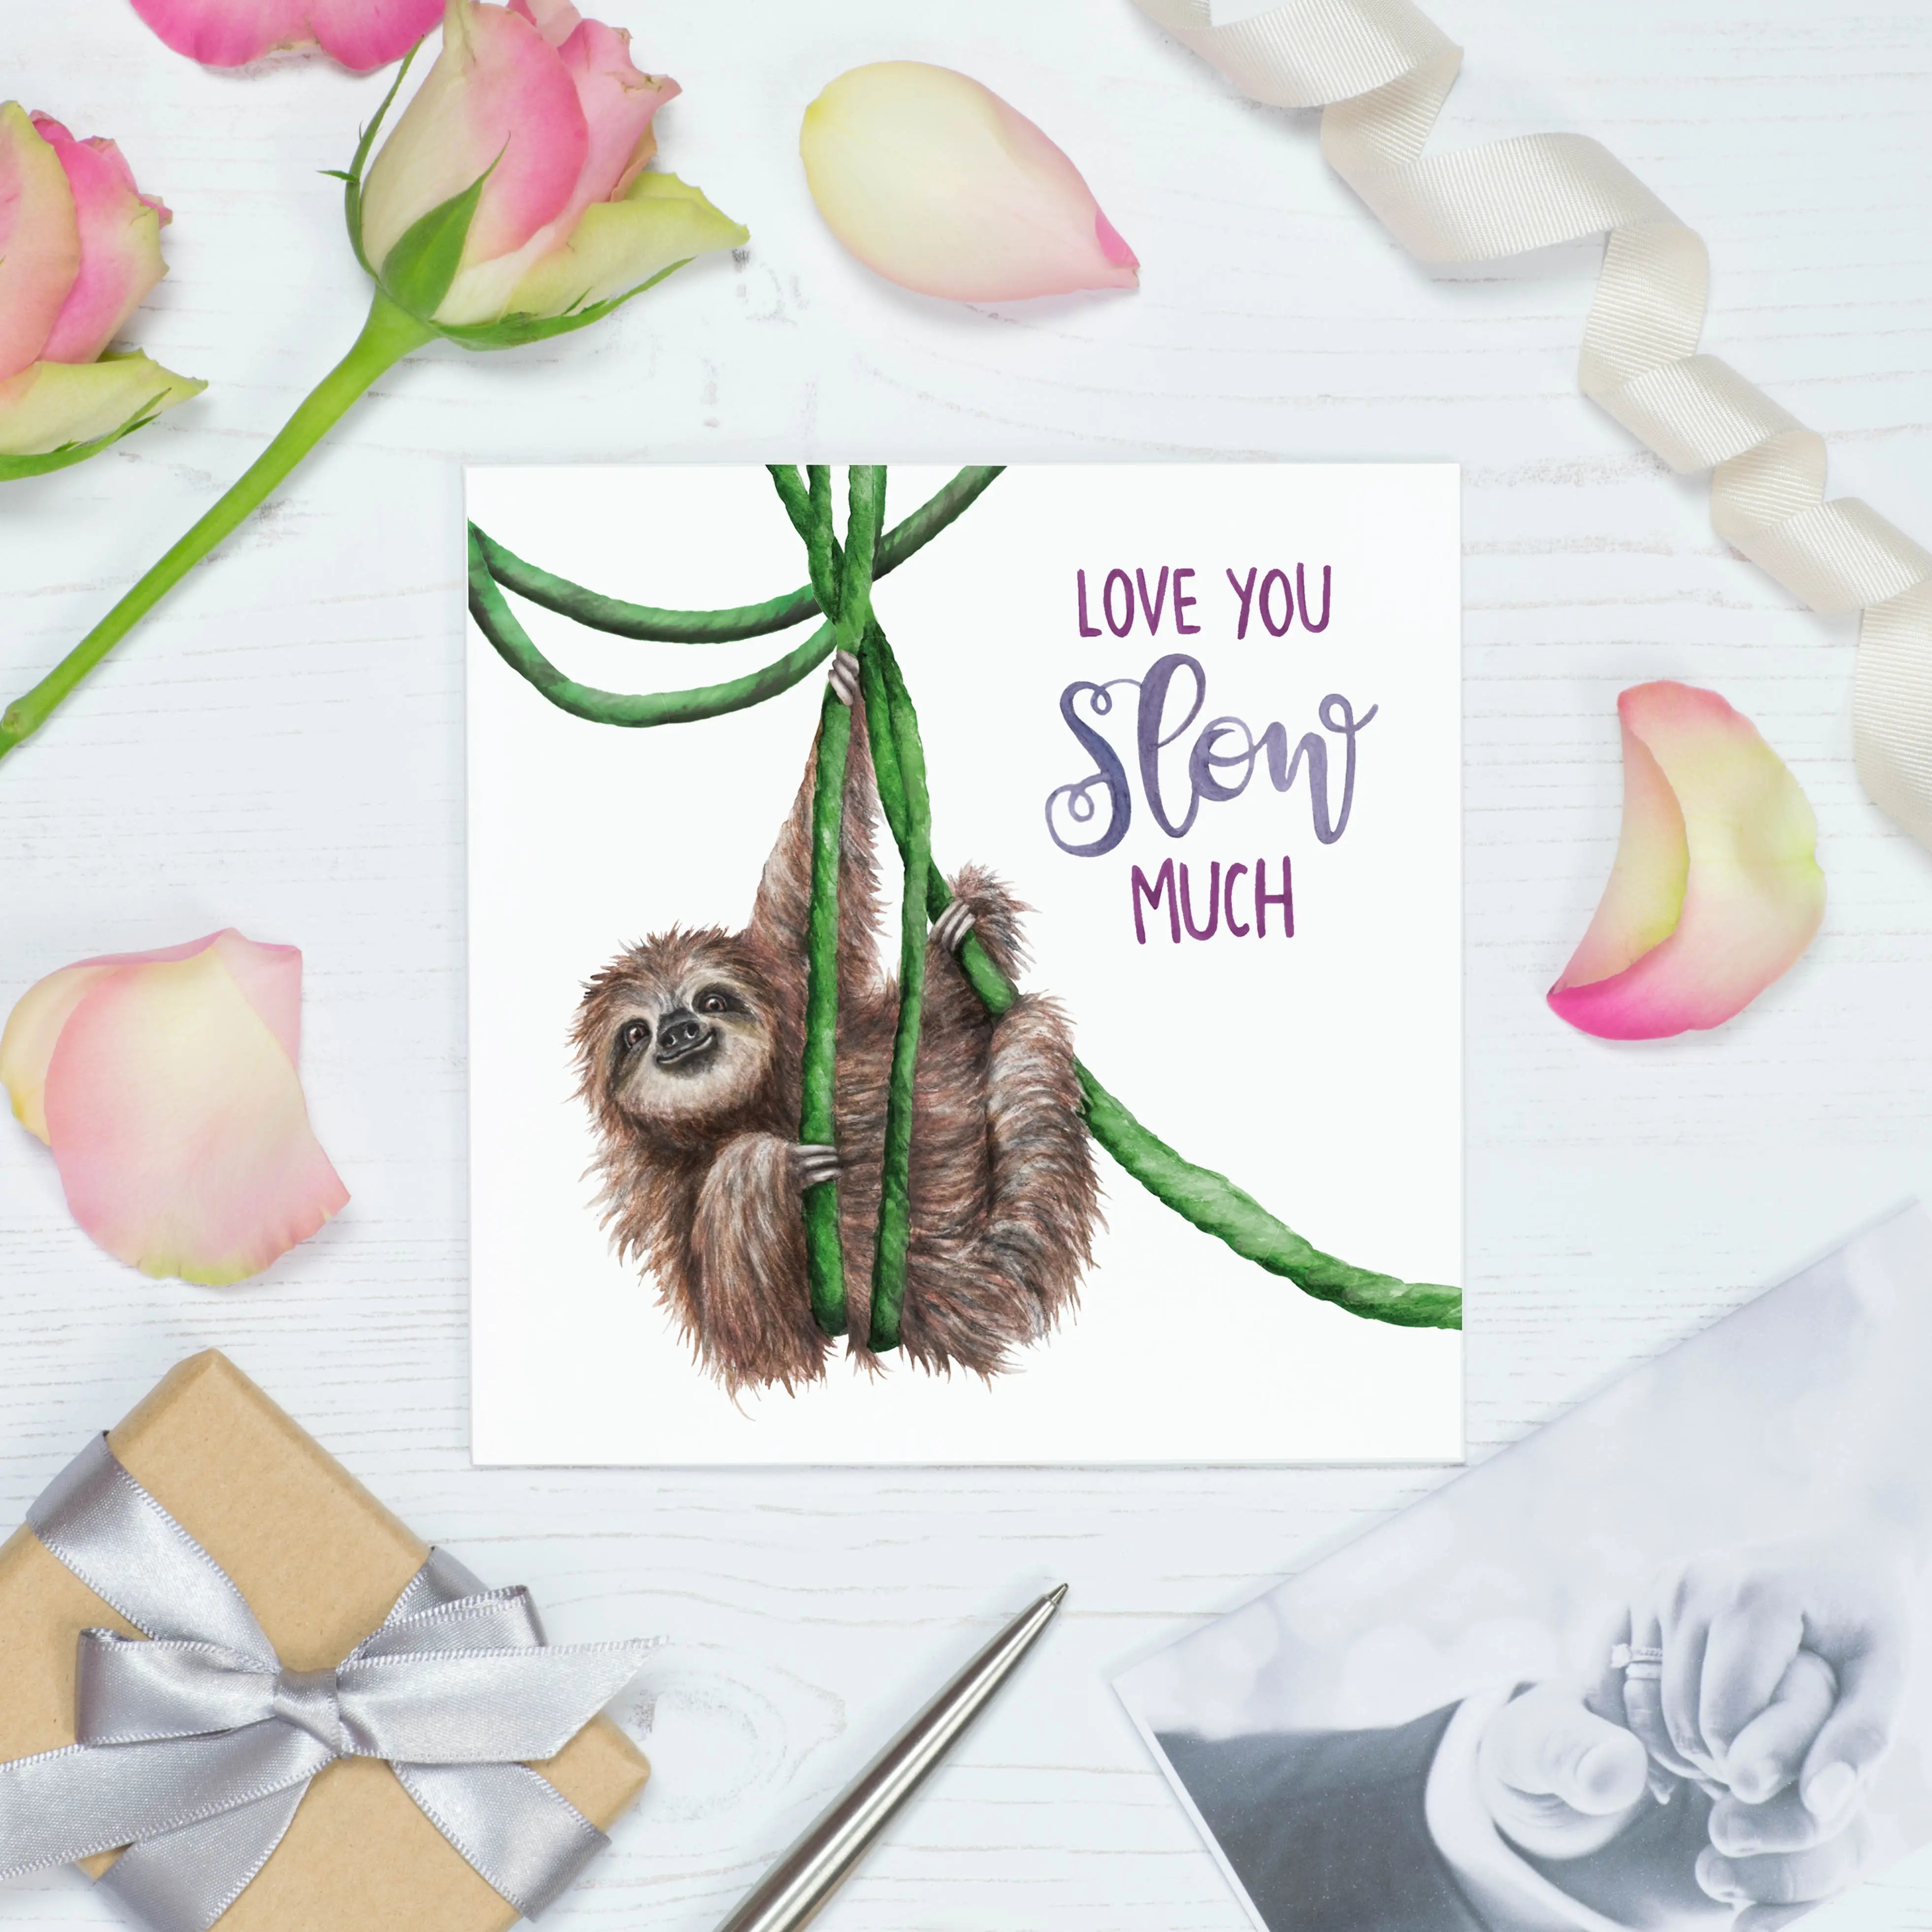 Greeting card sloth "Love You Slow Much" -. Fairy Positron